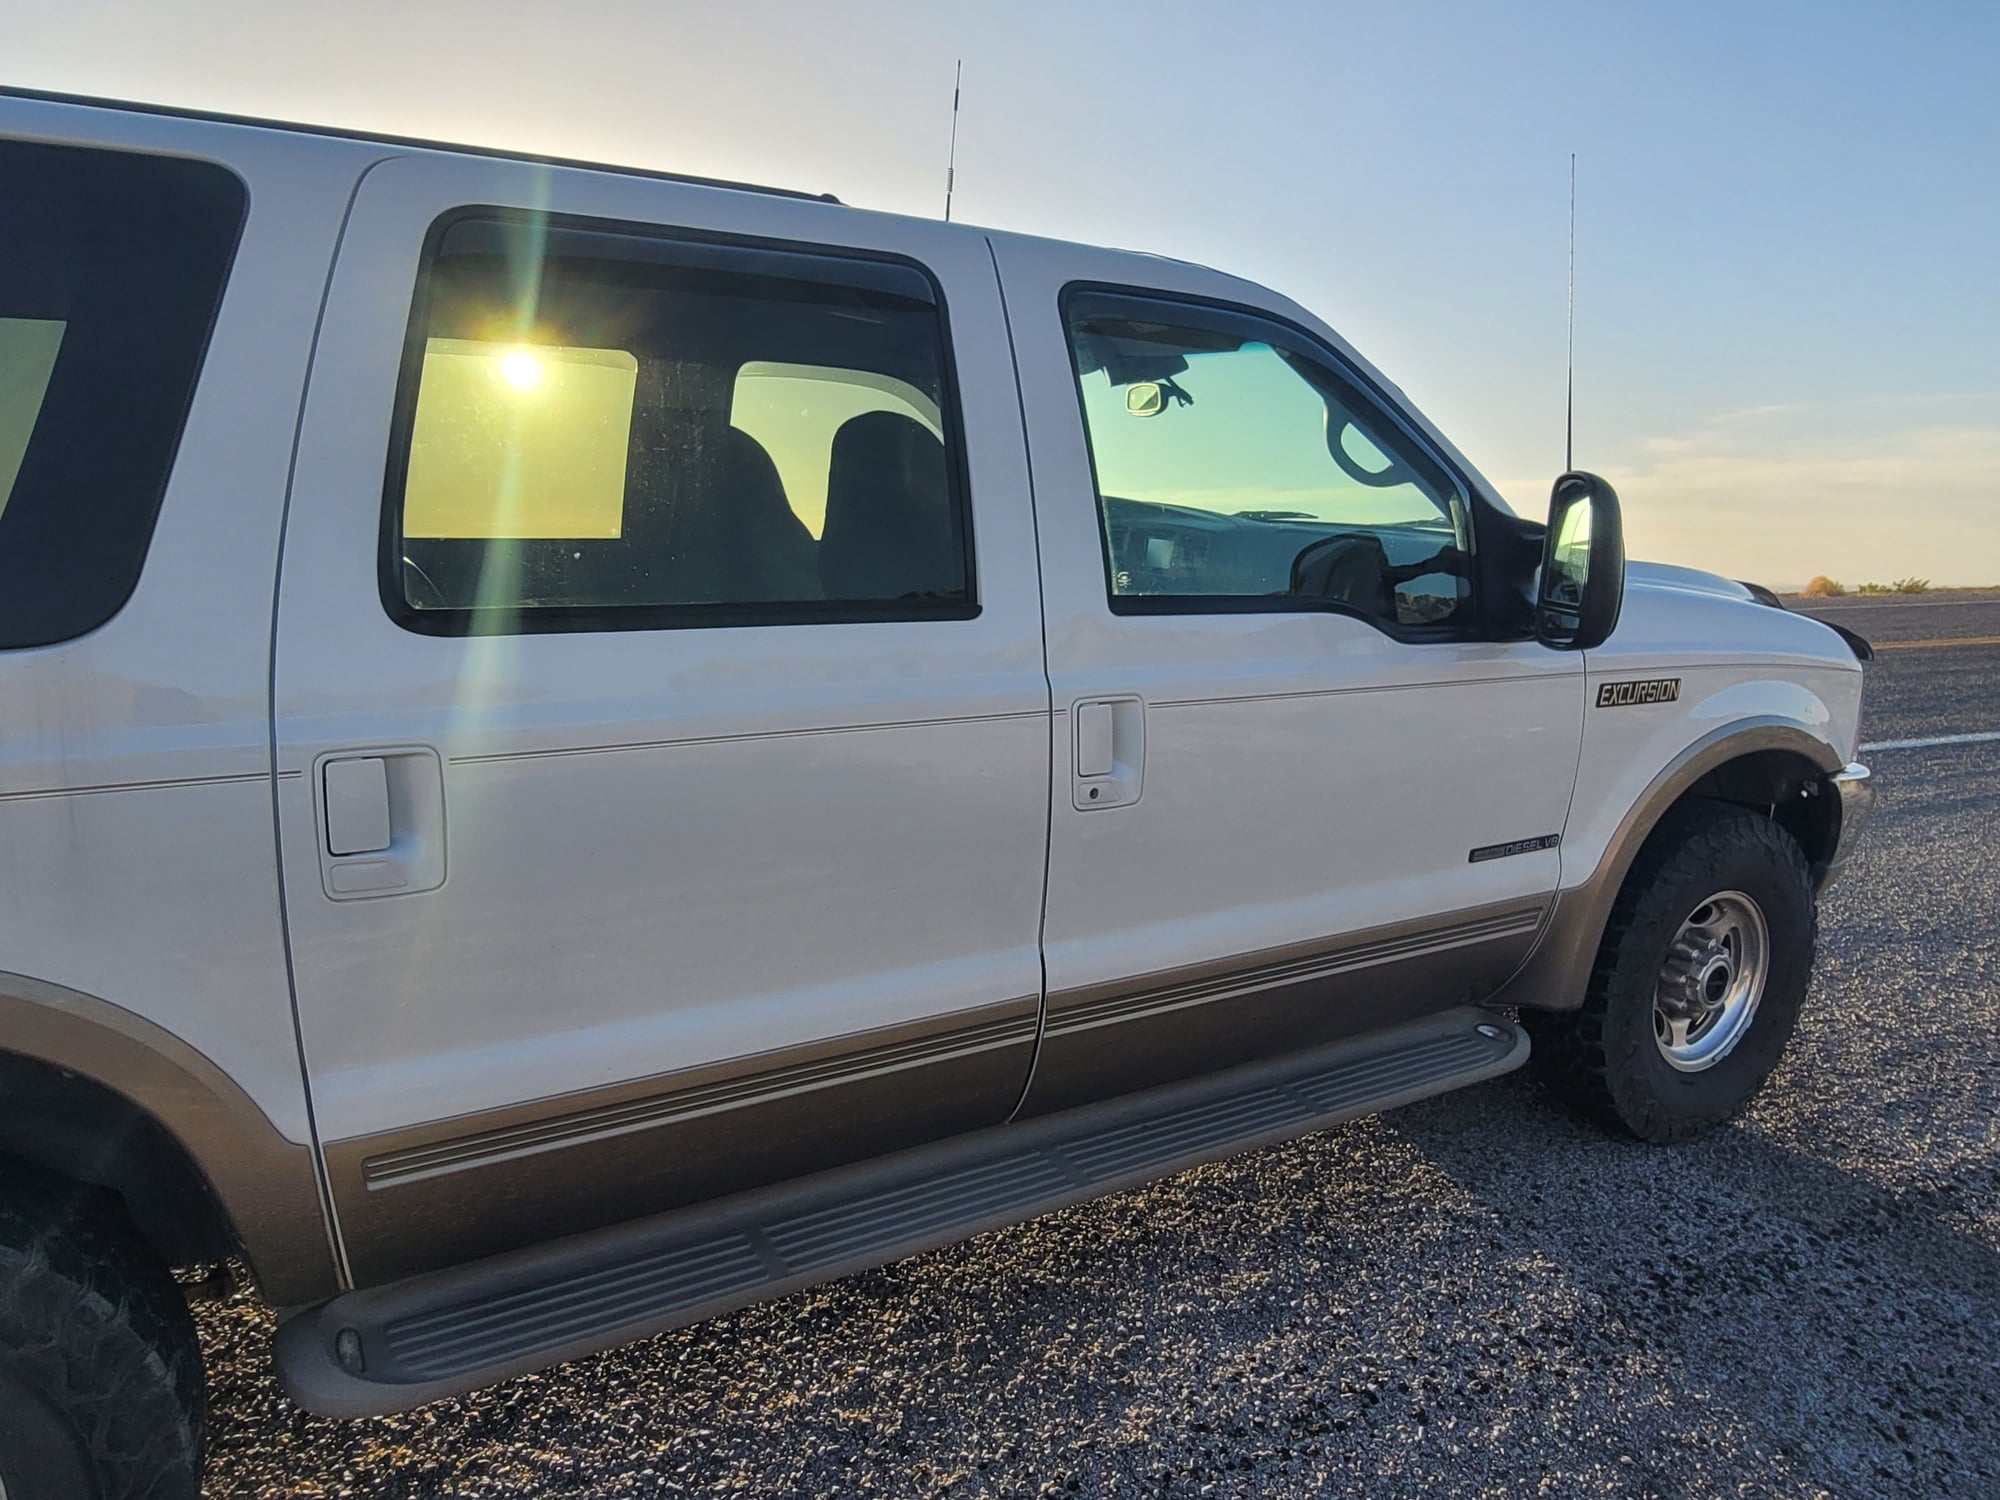 2001 Ford Excursion - 2001 Ford Excursion Limited, 7.3L, 4x4, BTS transmission - Used - Las Cruces, NM 88011, United States